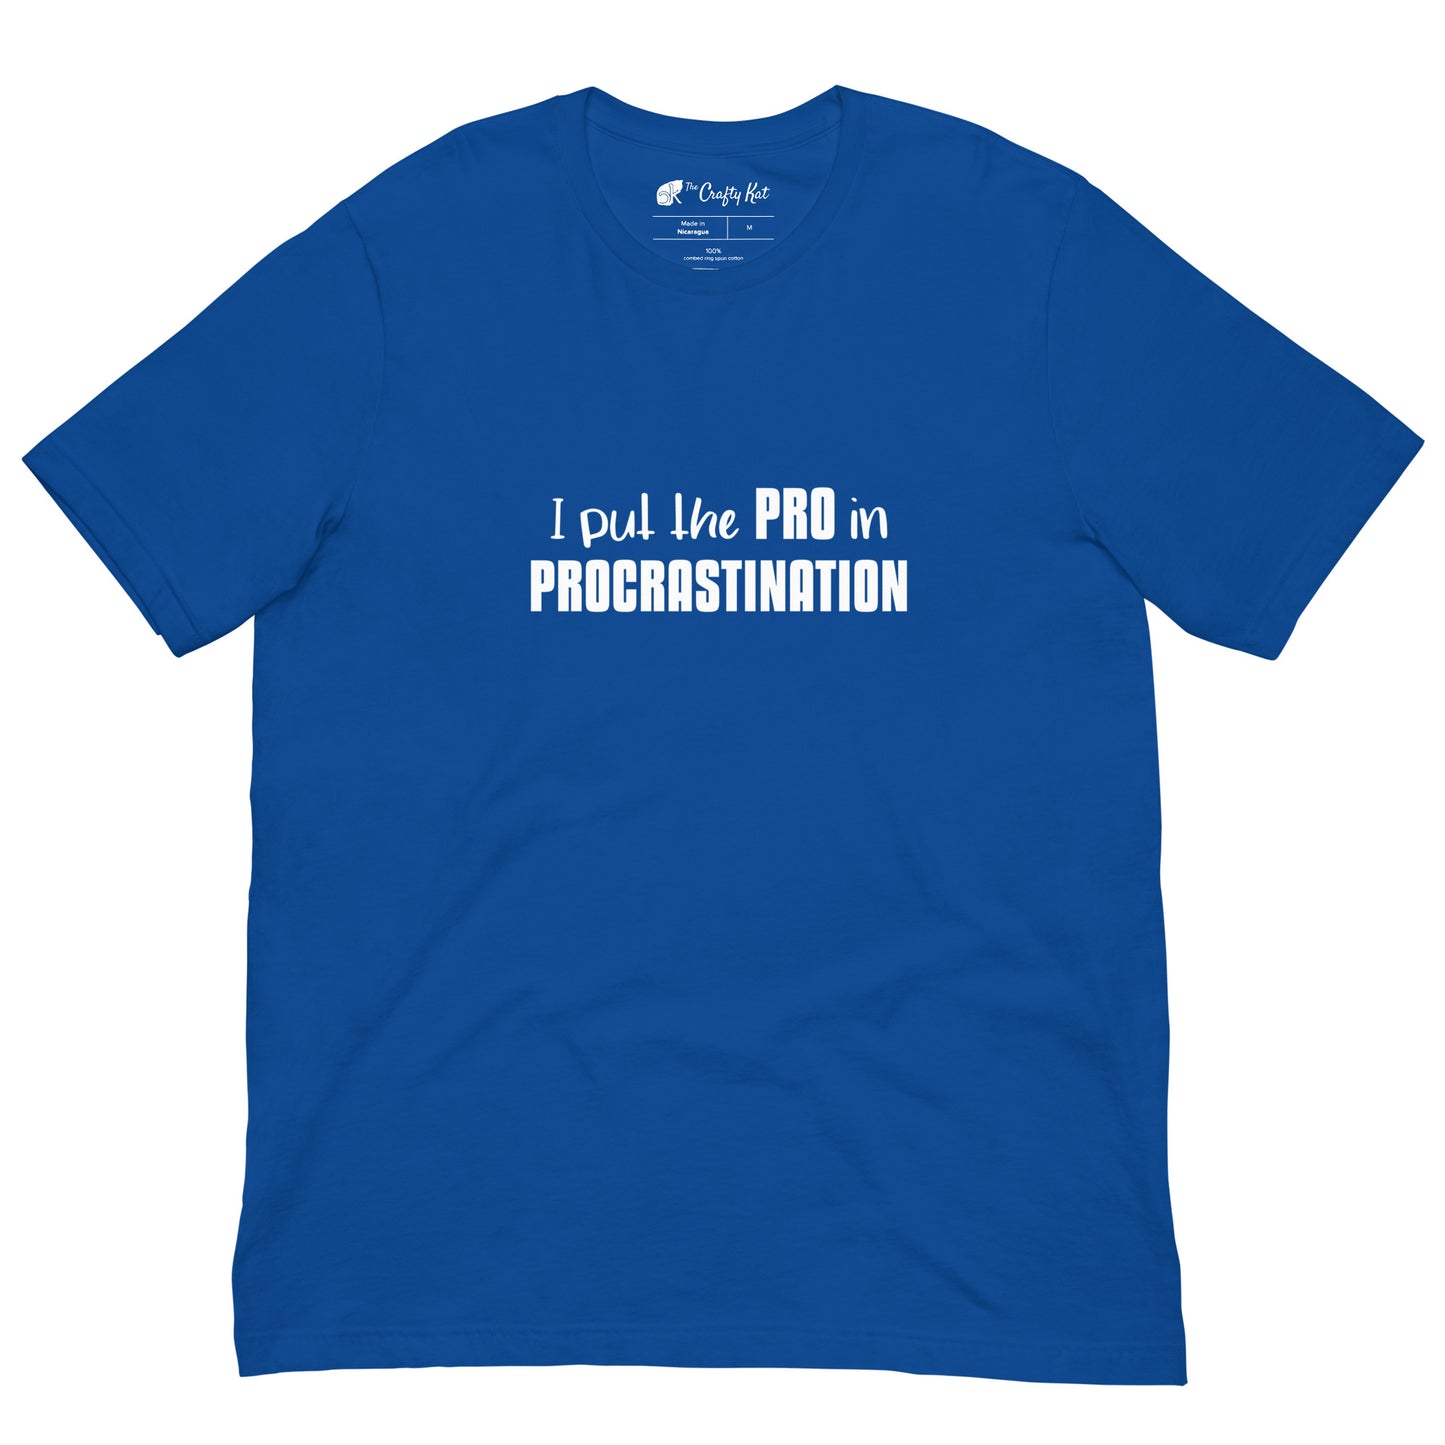 True Royal blue unisex t-shirt with text graphic: "I put the PRO in PROCRASTINATION"